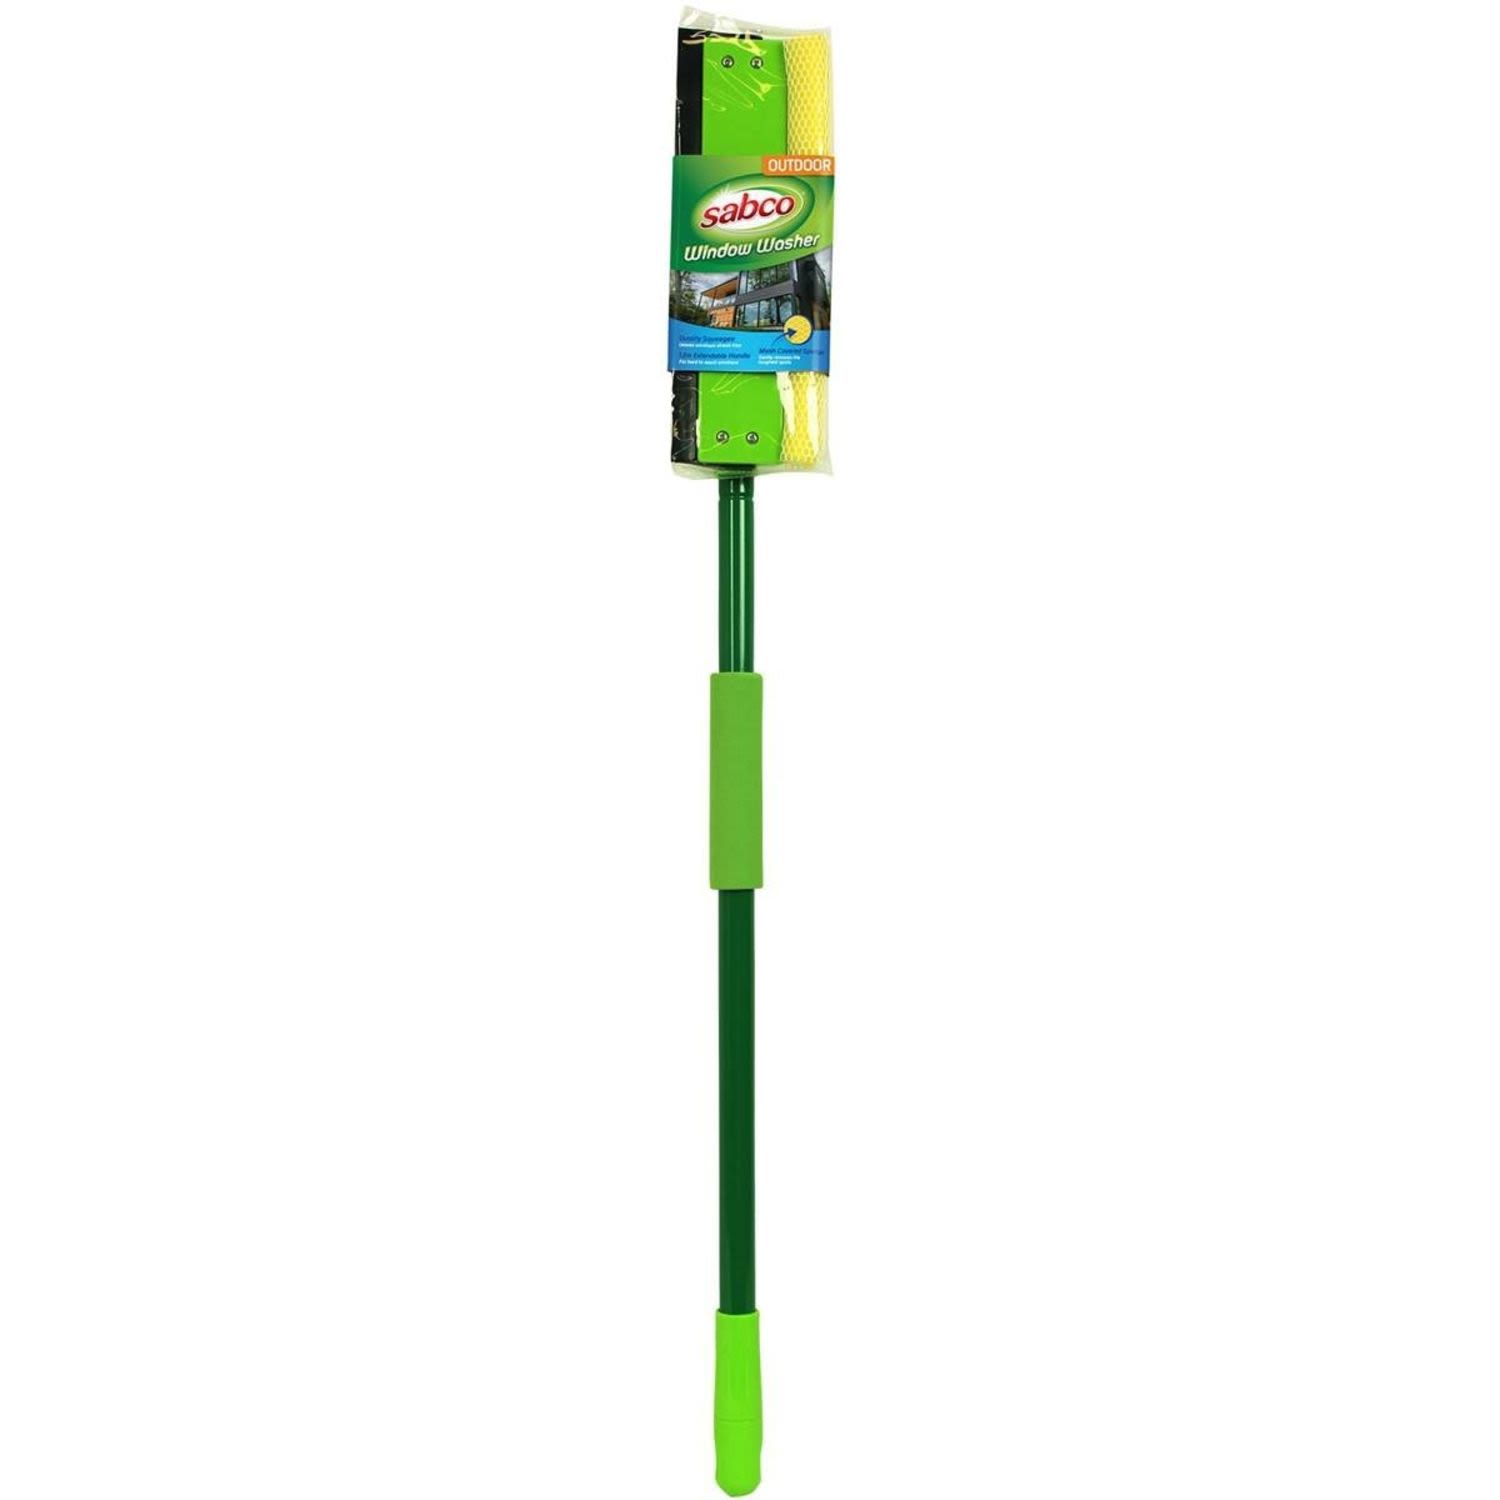 Sabco Dual Angle Window Washer with Extendable Handle, 1 Each